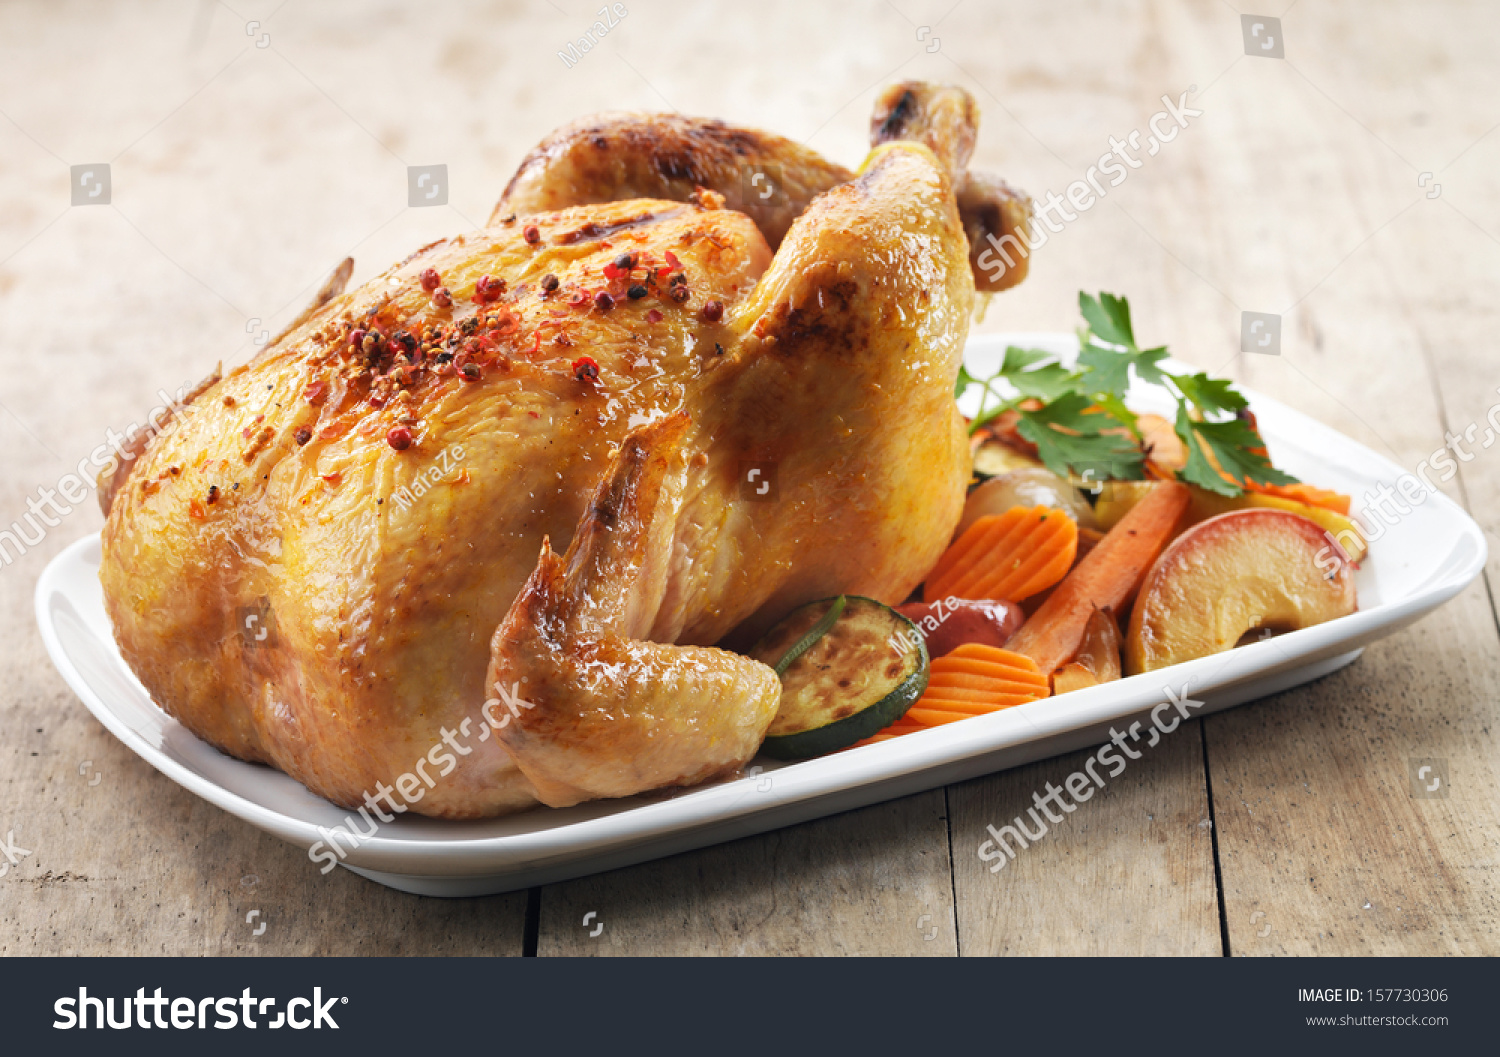 Roast Chicken And Various Vegetables On A White Plate Stock Photo ...